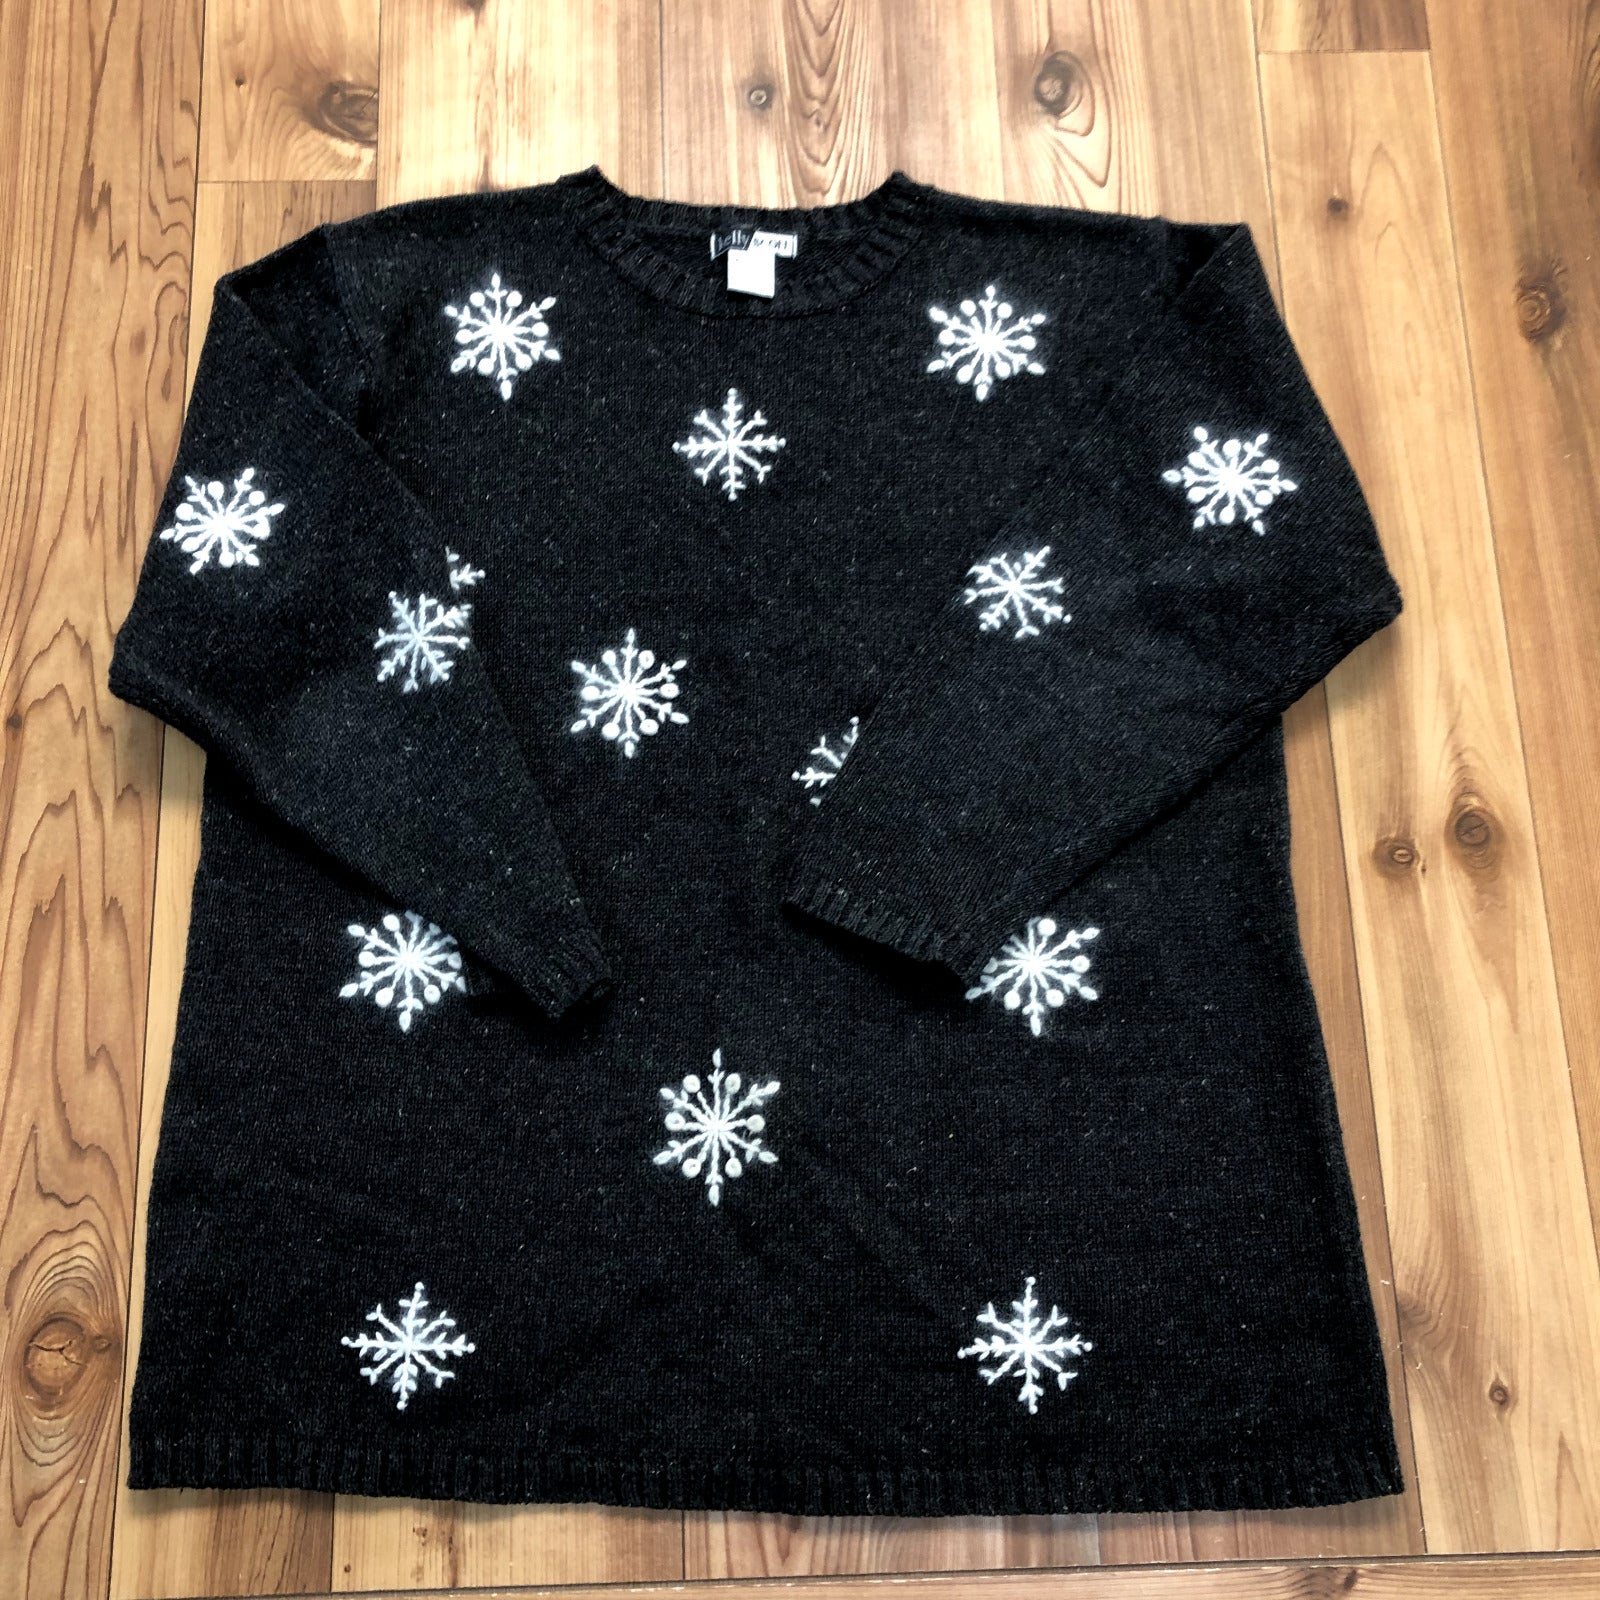 Kelly Scott Gray Knitted Snowflakes Long Sleeve Holiday Sweater Women's L